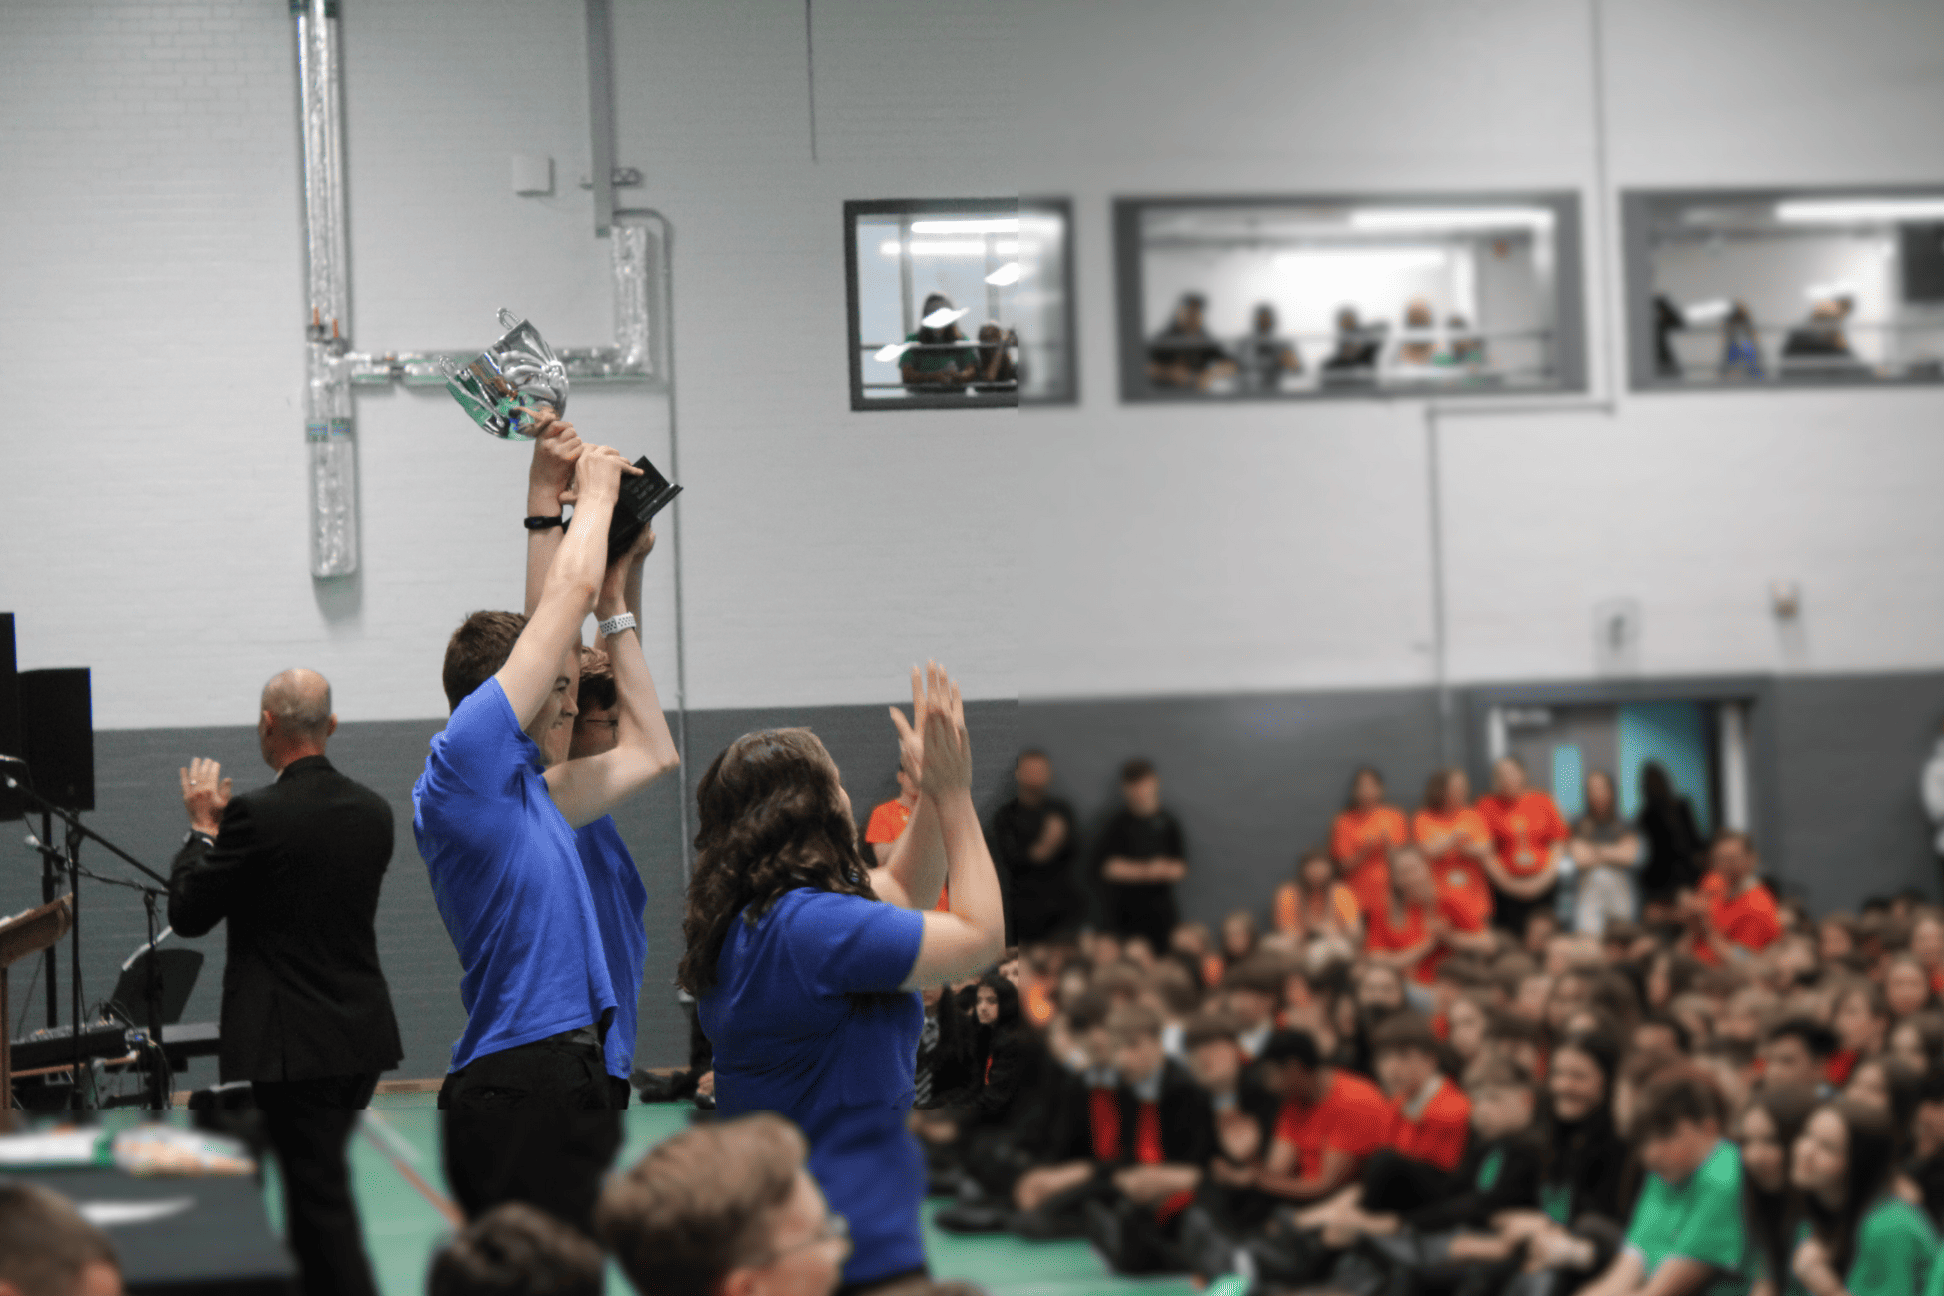 Fortius, the winning House of Cheadle Hulme High School with the most House Points this year, raise the trophy smiling.